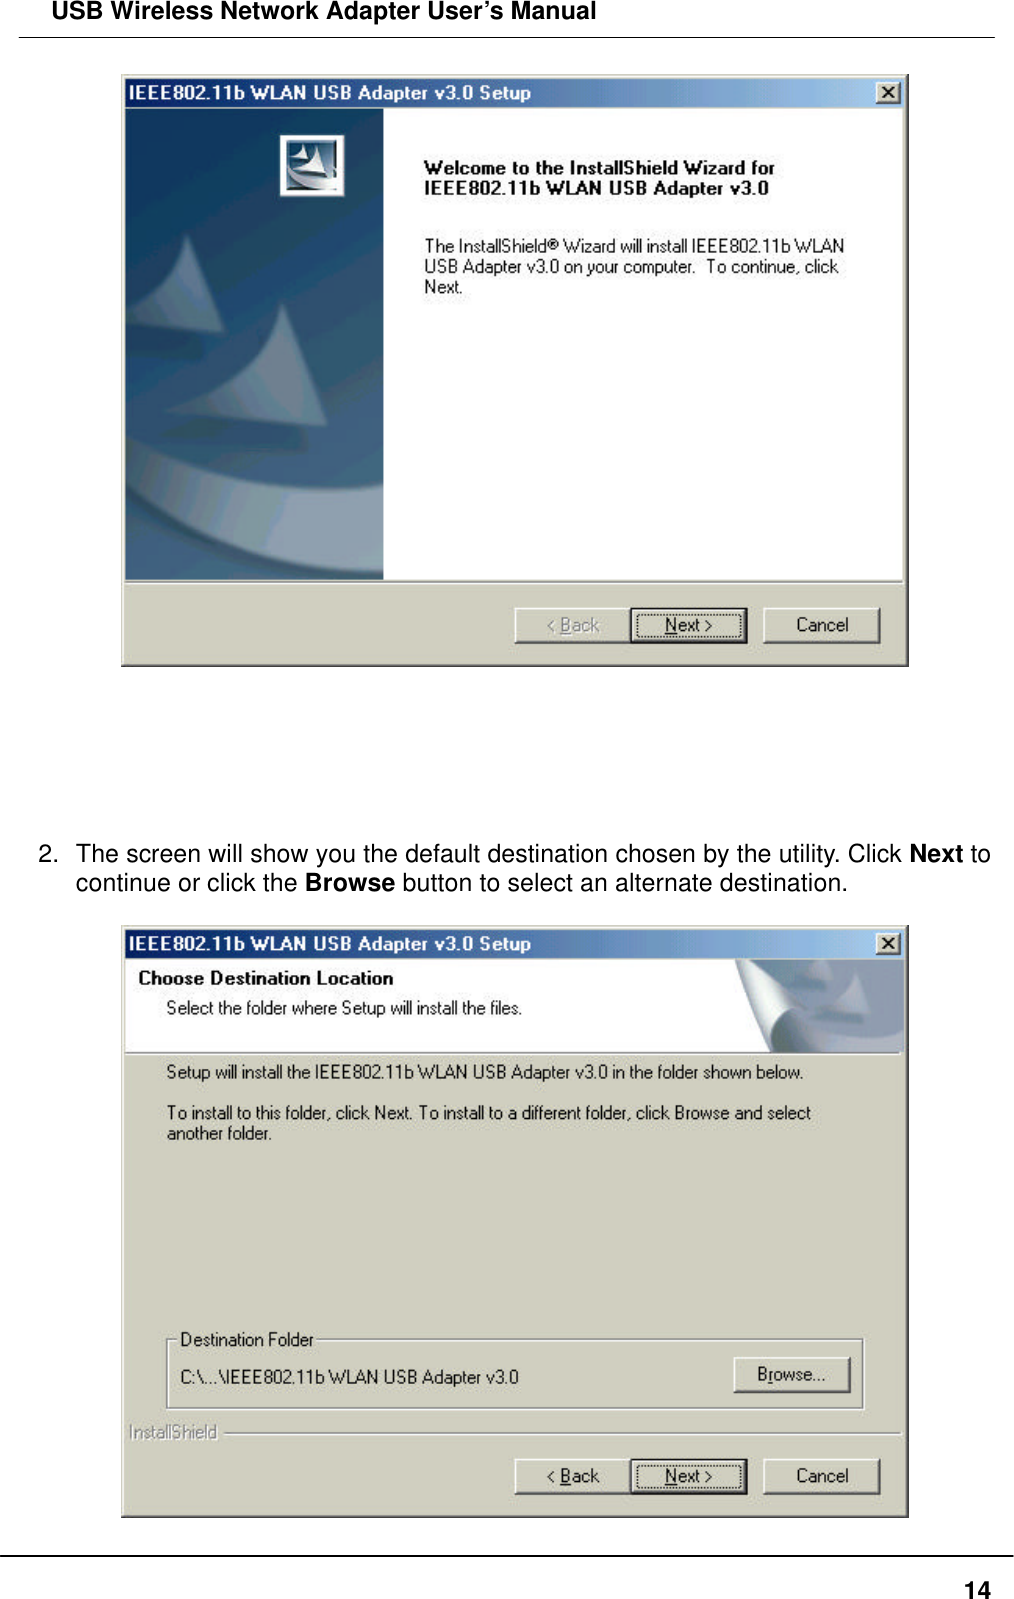  USB Wireless Network Adapter User’s Manual  14       2. The screen will show you the default destination chosen by the utility. Click Next to continue or click the Browse button to select an alternate destination.   